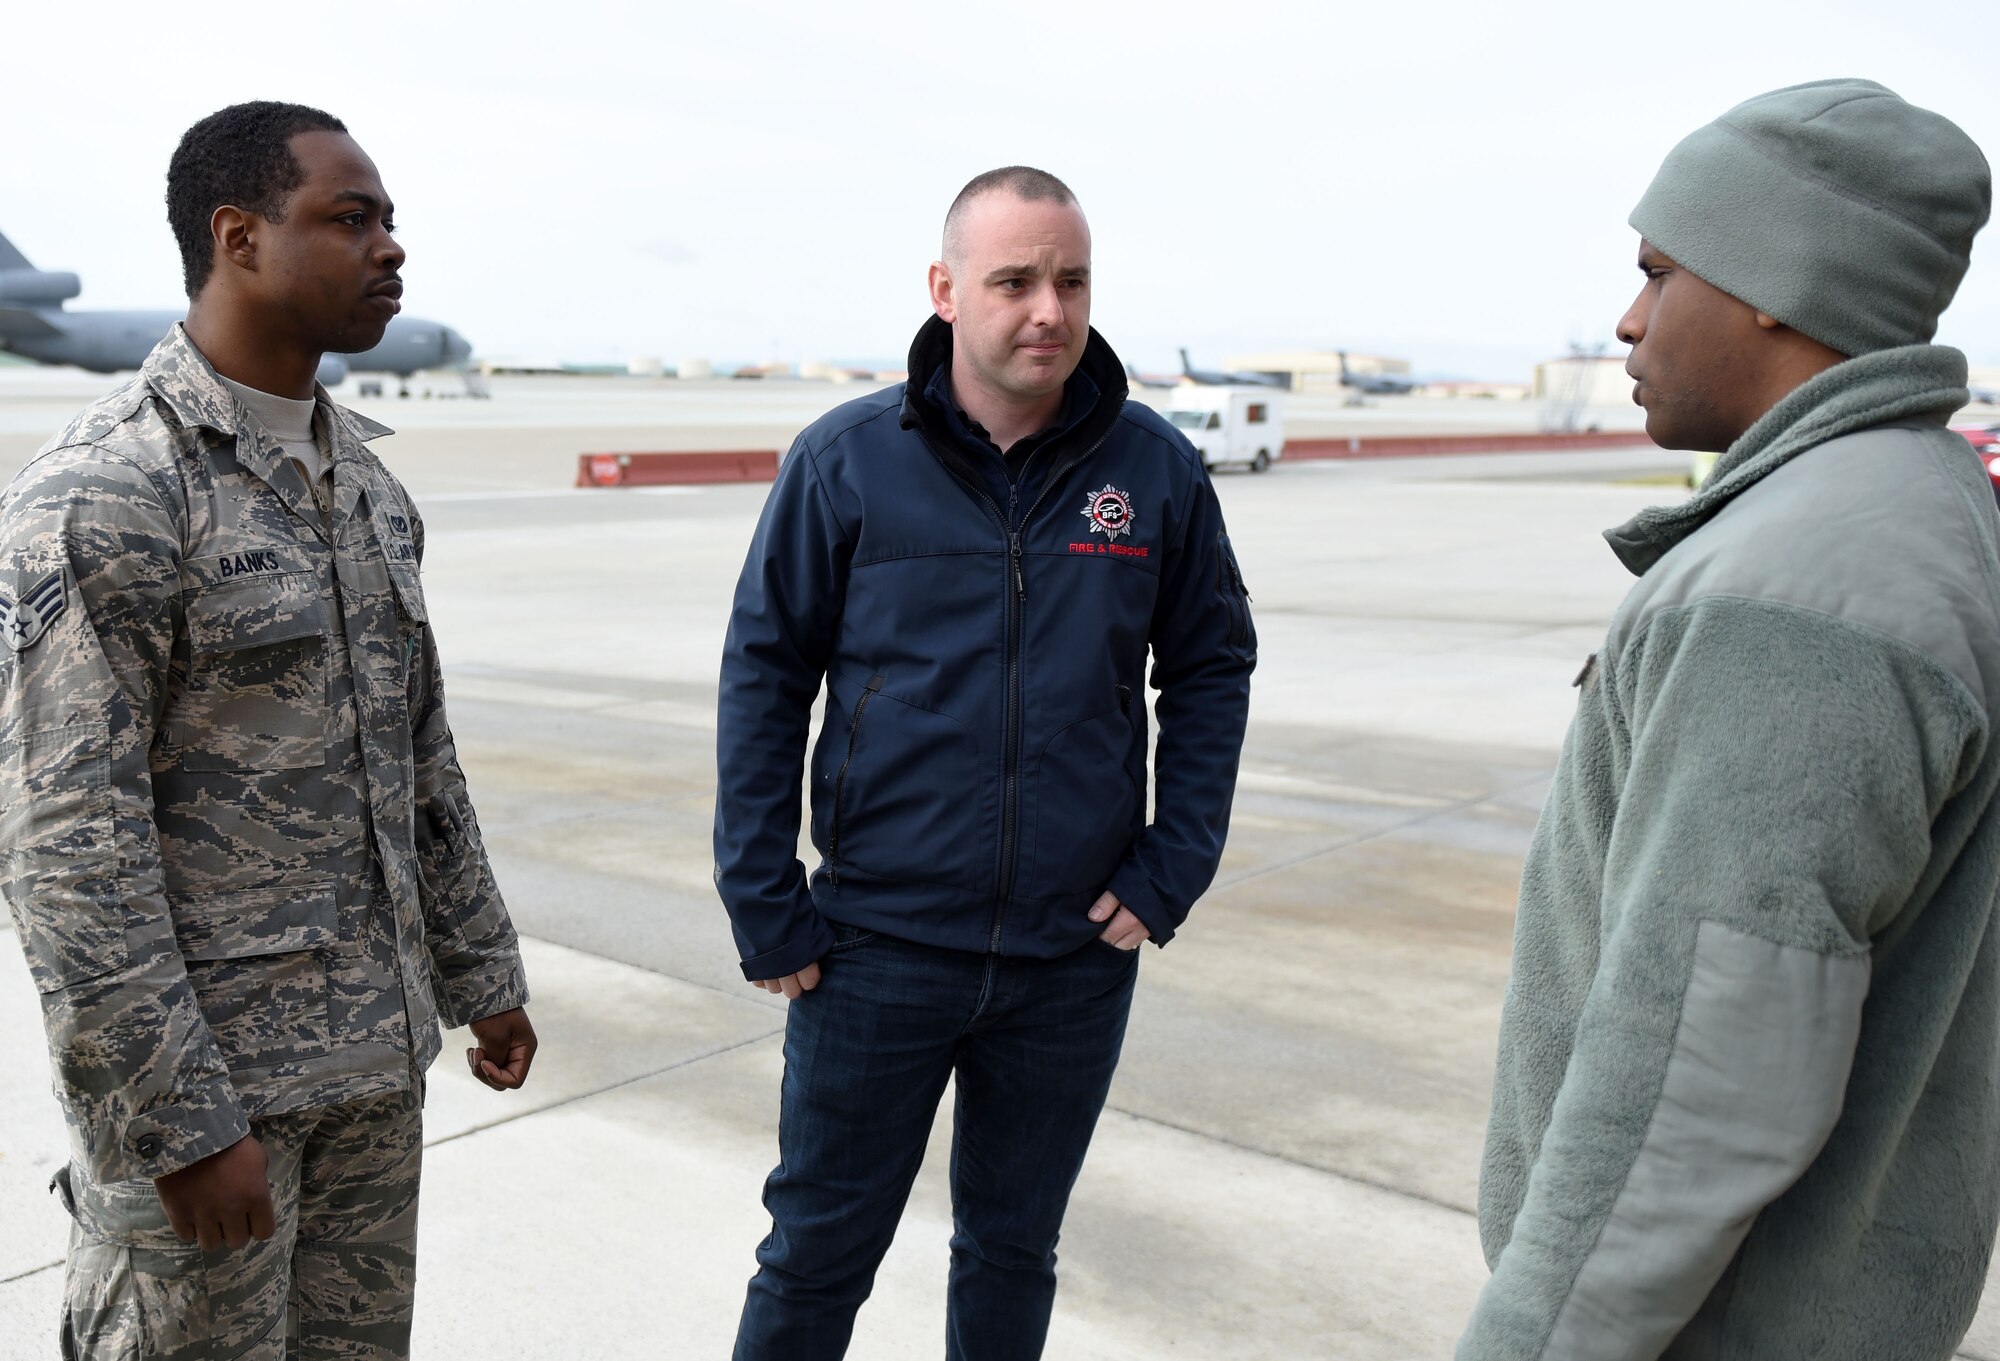 Aaron McAuley, center, a Belfast International Airport Rescue and Firefighting Service crew commander, stands with Senior Airmen Shannon Banks, left, and Danny Thomas, right, both 60th Civil Engineer Squadron firefighters during a meet and greet session April 11 at Travis Air Force Base, Calif. In addition to empowering each other through spirituality, Firefighters for Christ also encourages the exchanging of ideas and methods so as to keep the skills of each participating firehouse sharp and efficient. (U.S. Air Force photo by Airman 1st Class Christian Conrad)